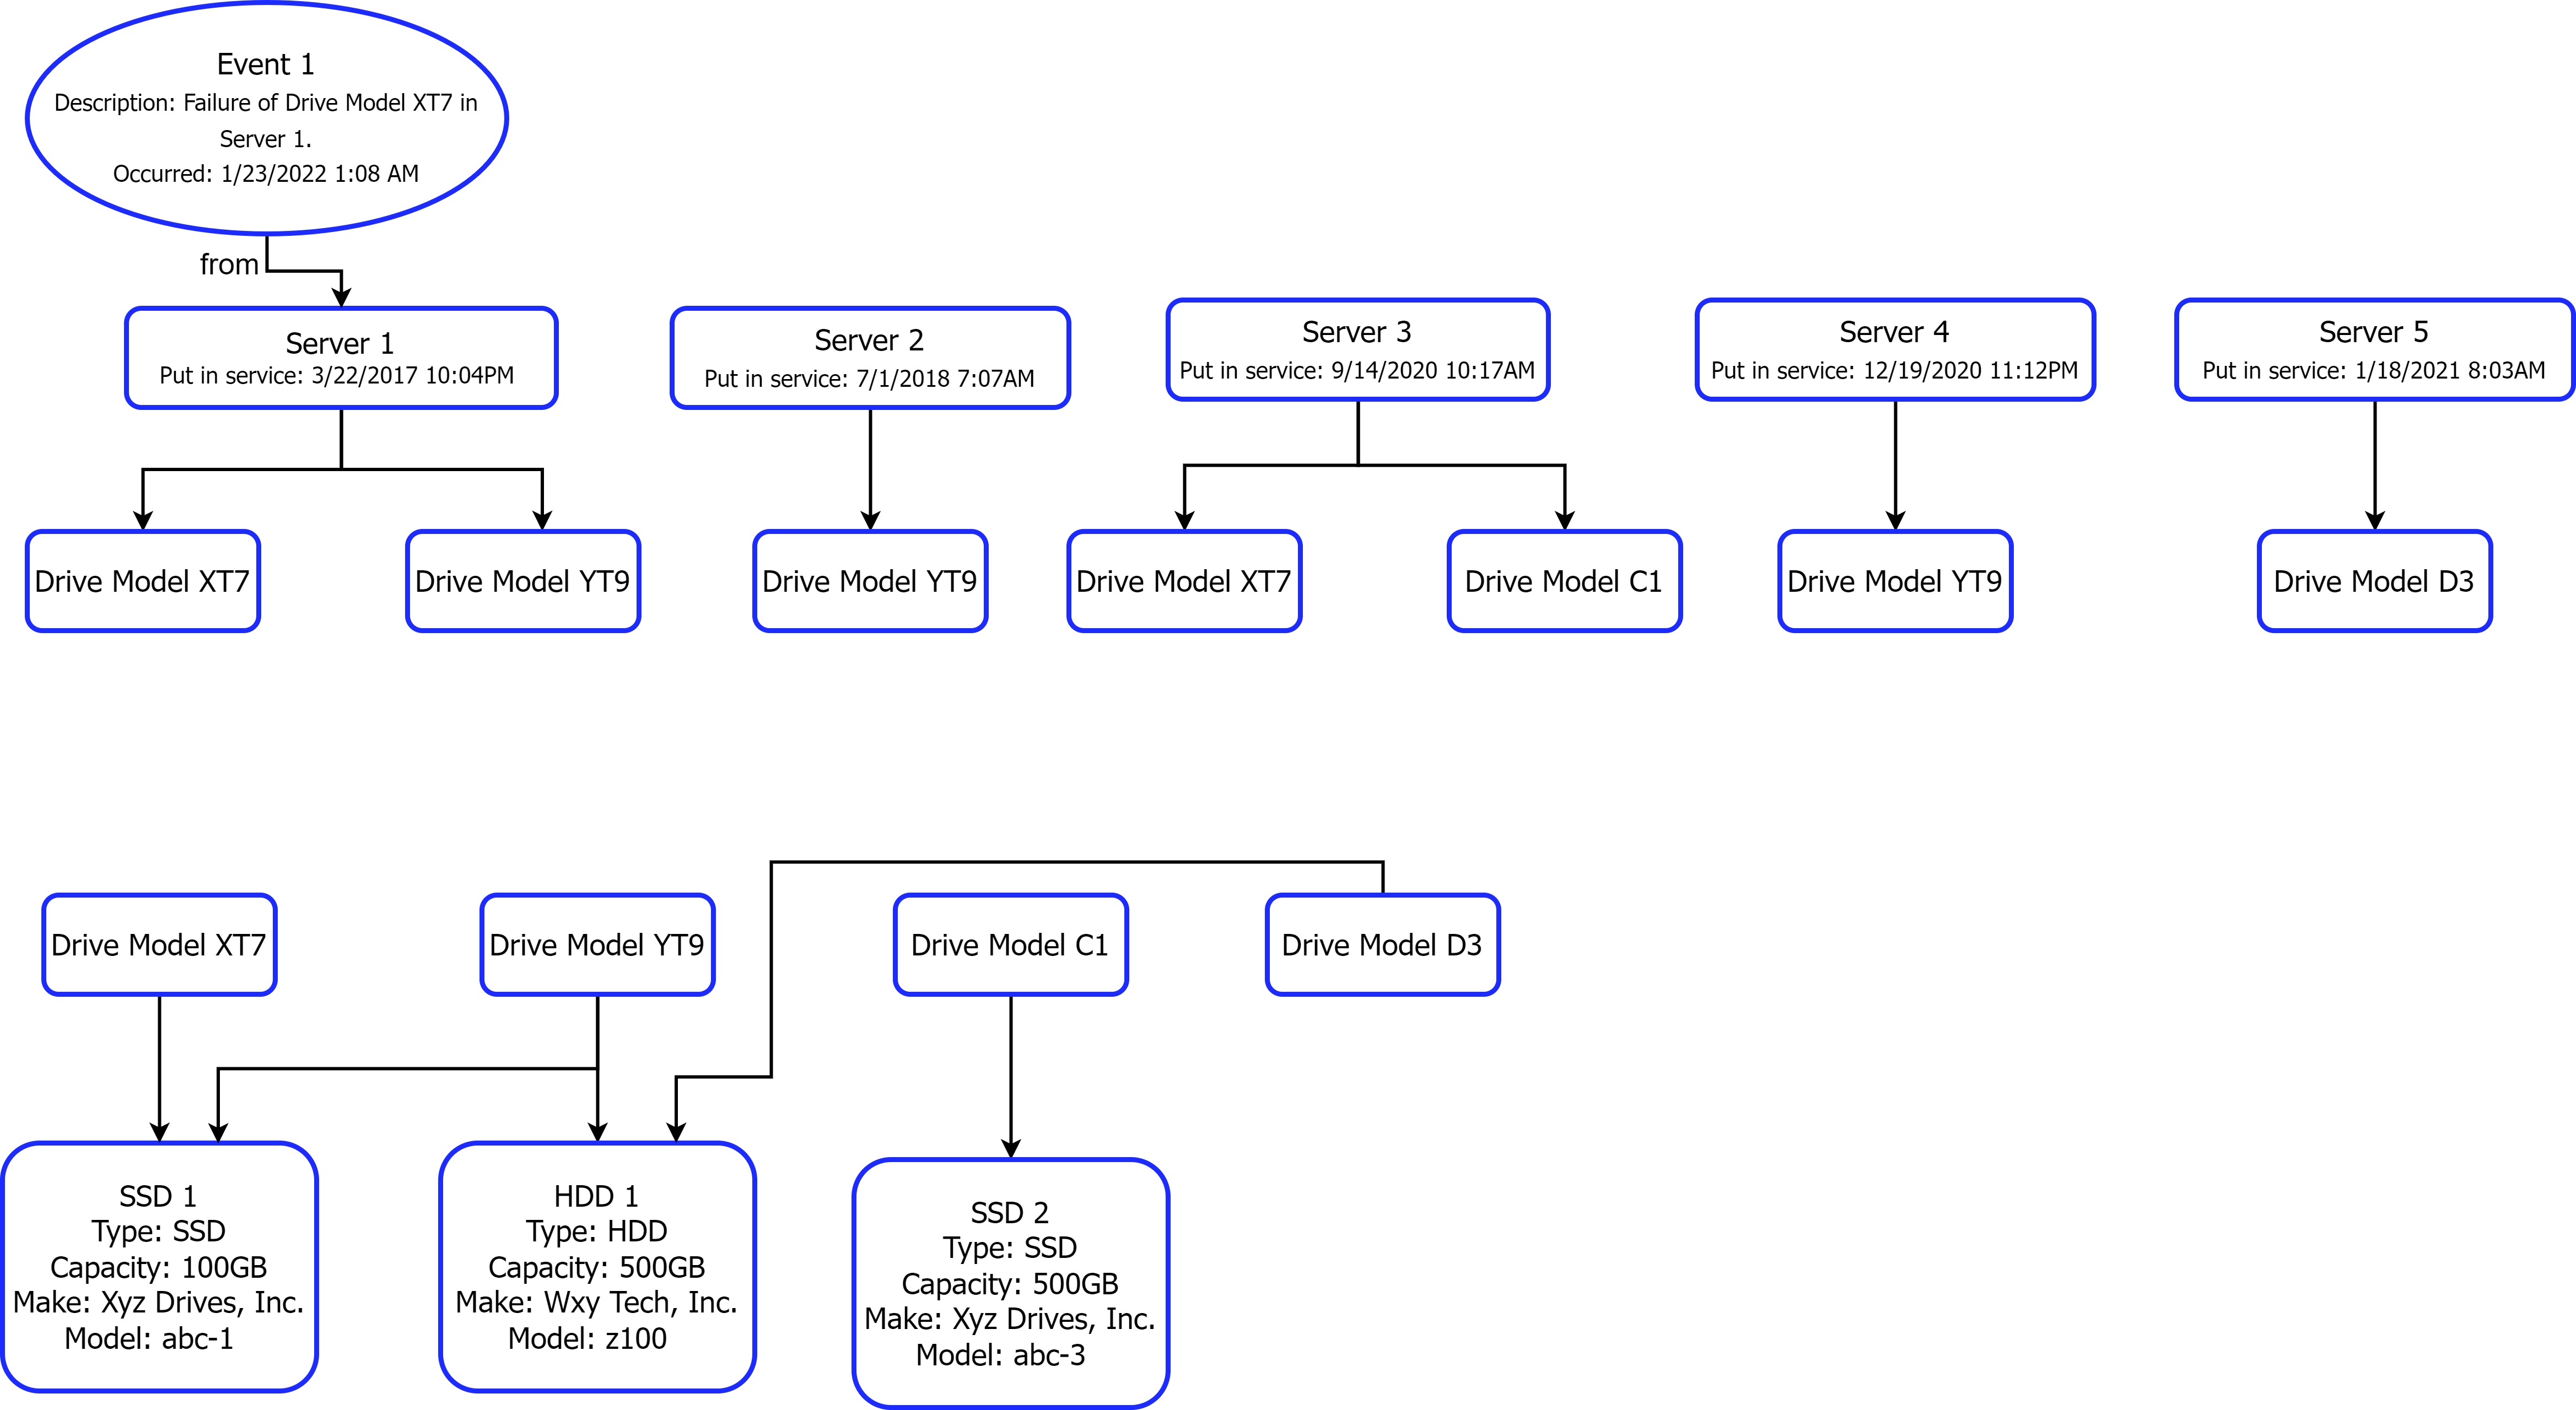 Diagram of IT Server Farm DataJamDB Graph Database for Event Tracking and Failure Prediction